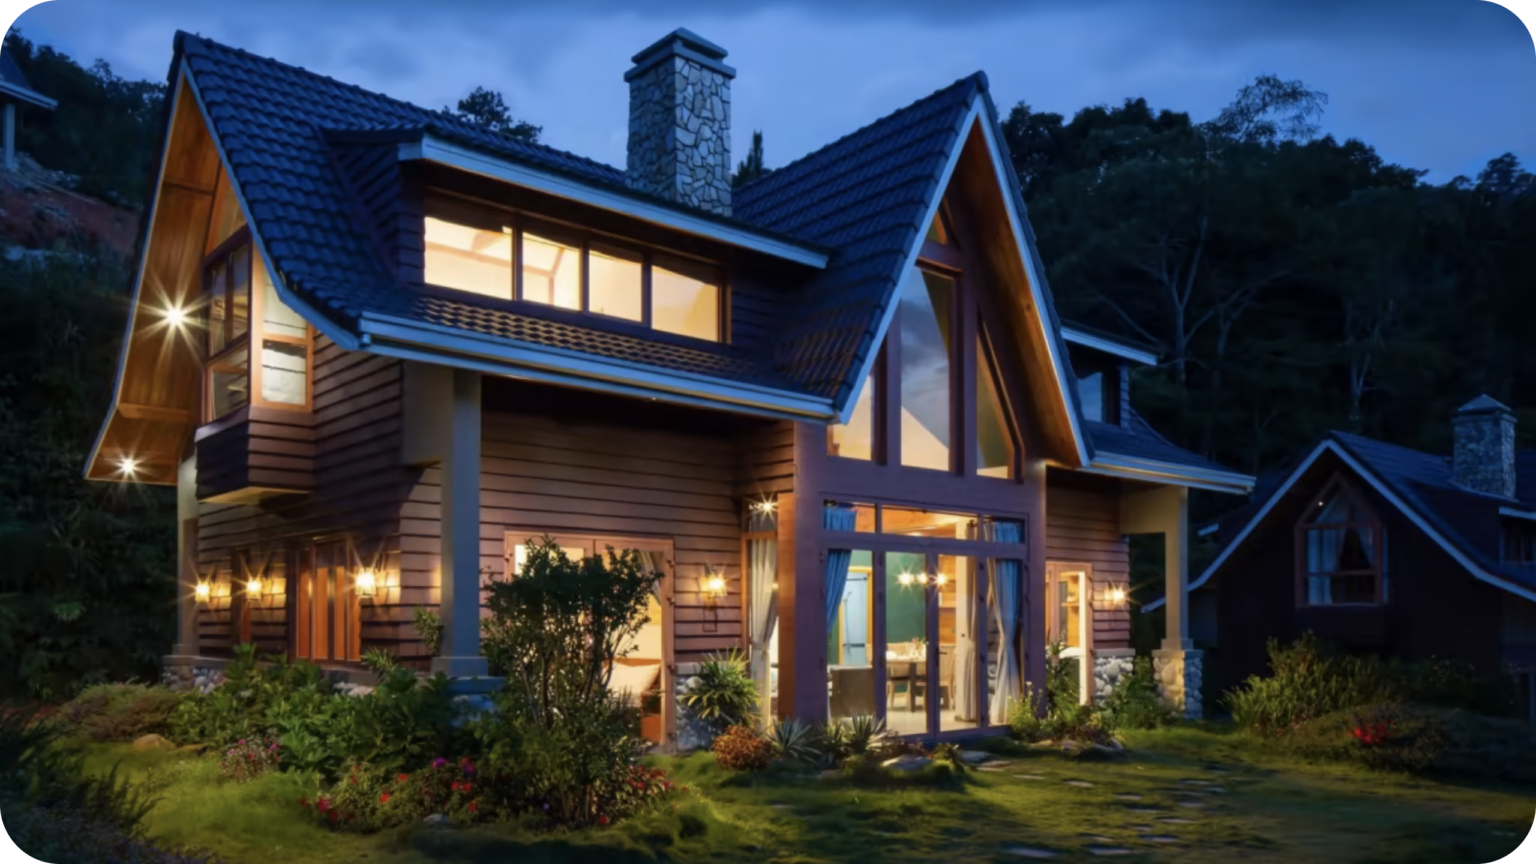 Your Home Electrification Checklist: 5 Upgrades for a Sustainable Home